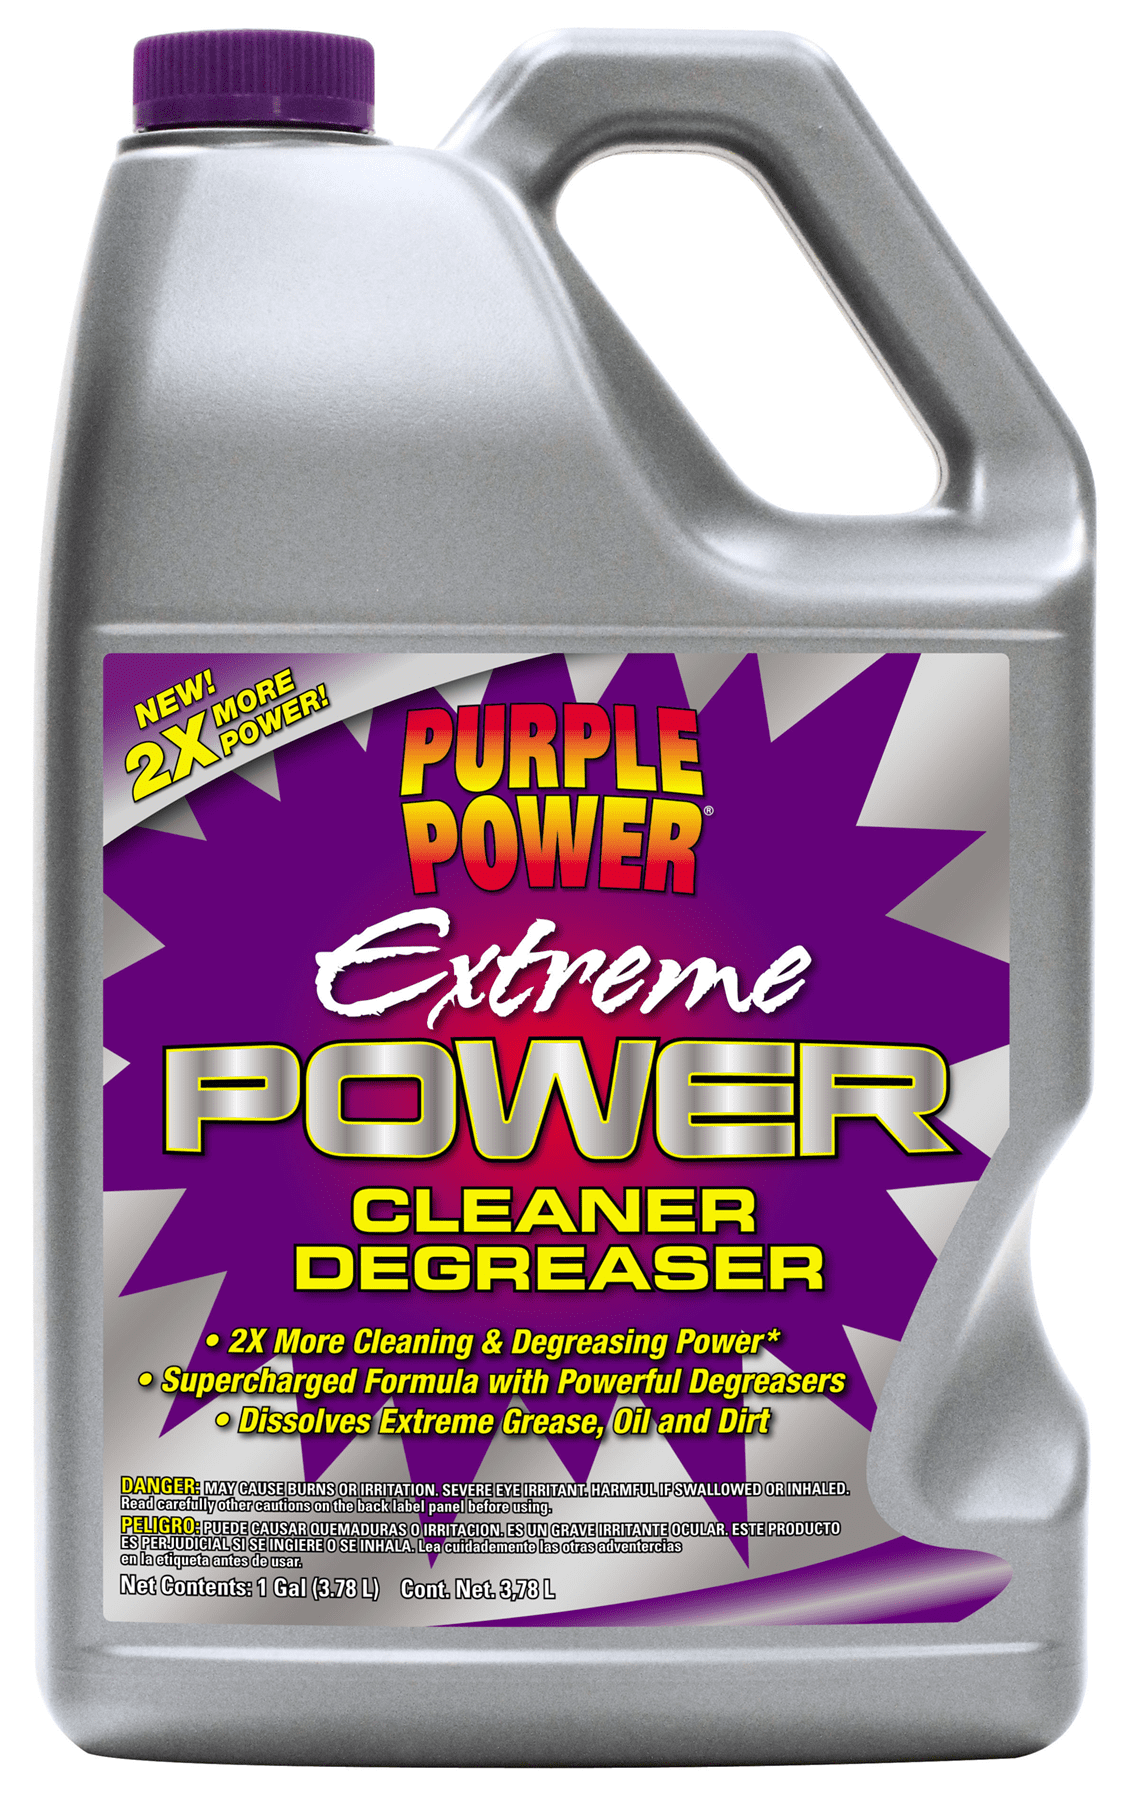 Can I use Purple Power cleaner/degreaser?